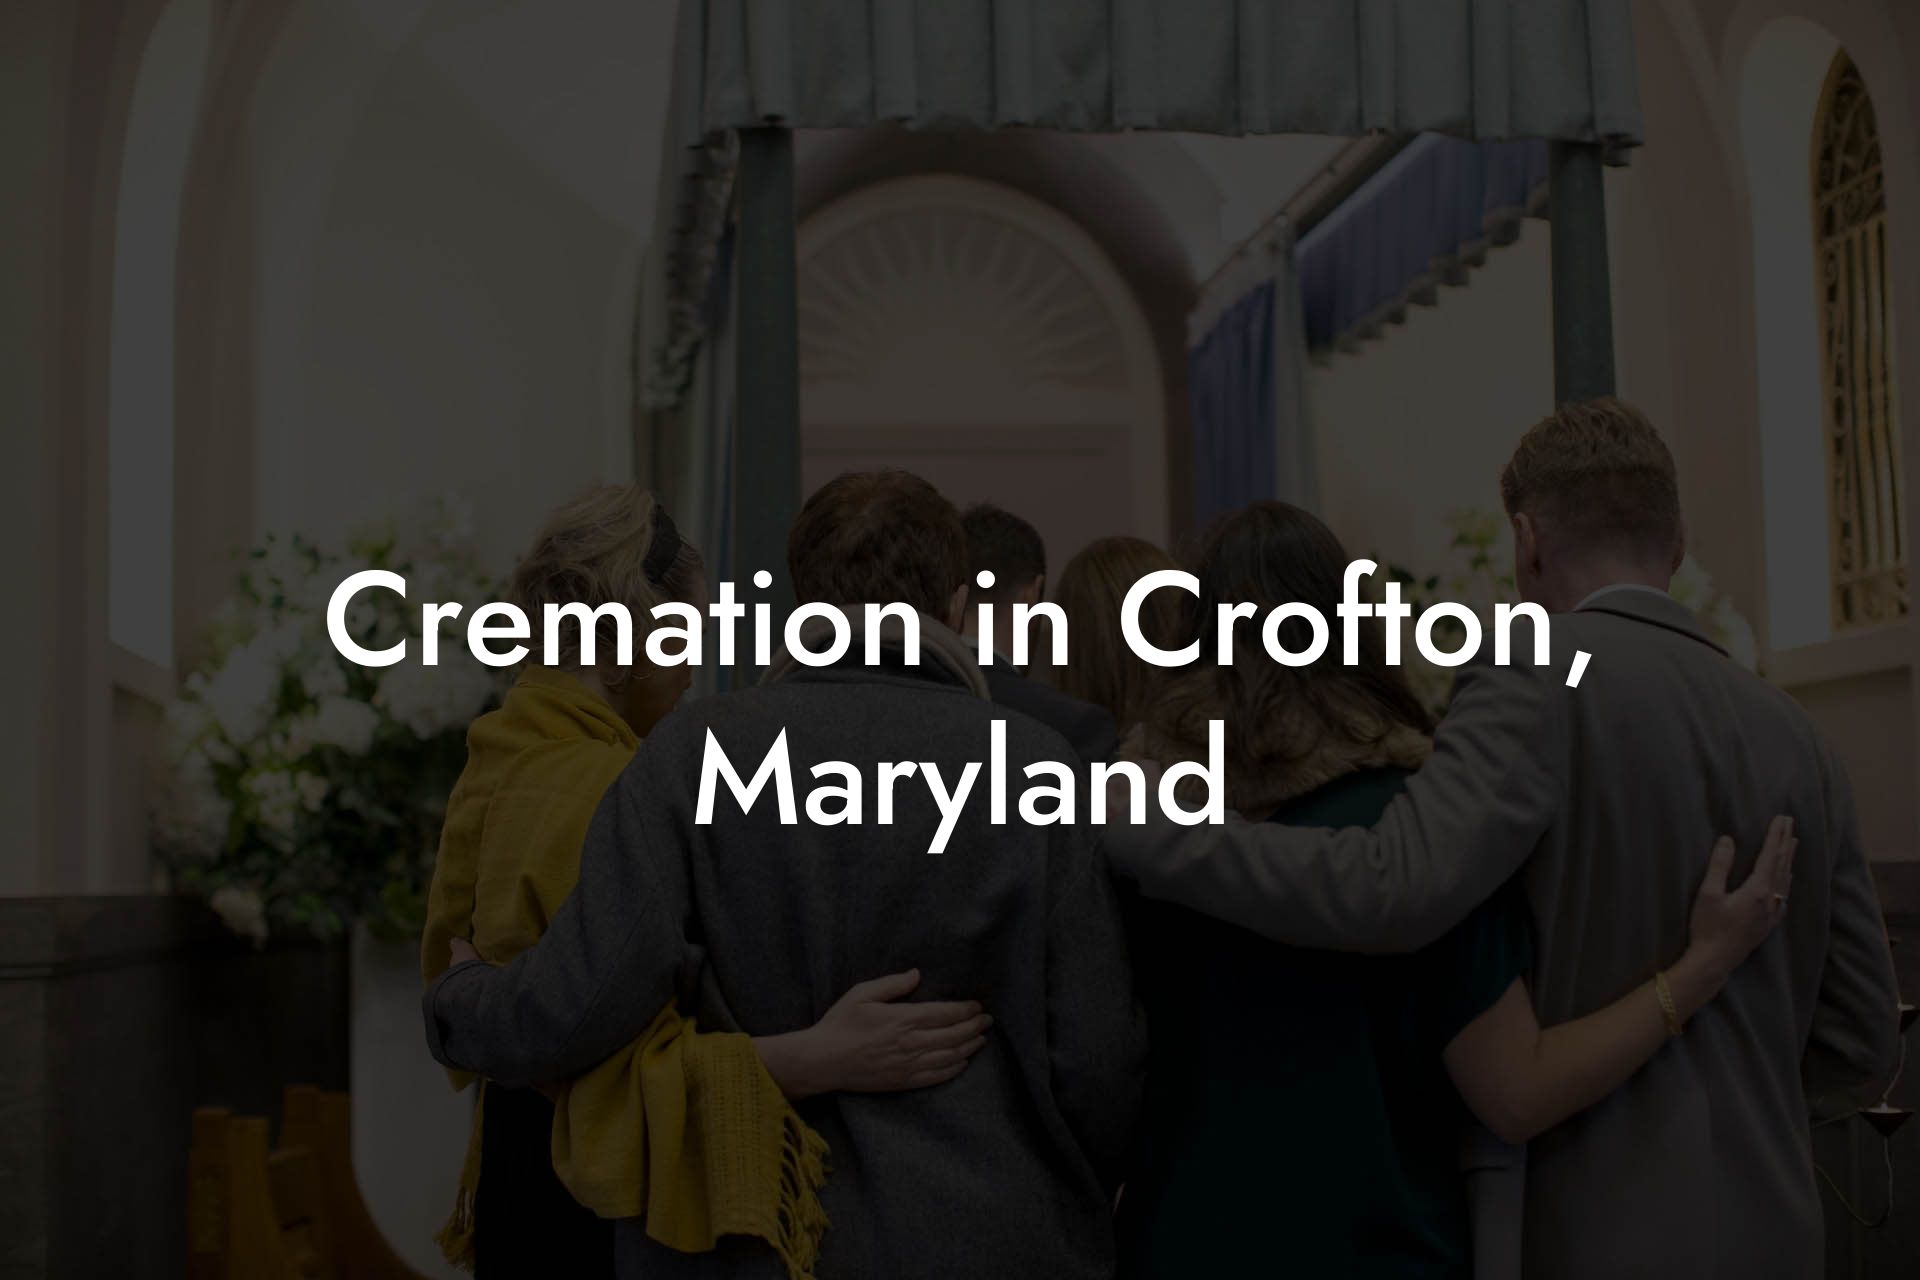 Cremation in Crofton, Maryland